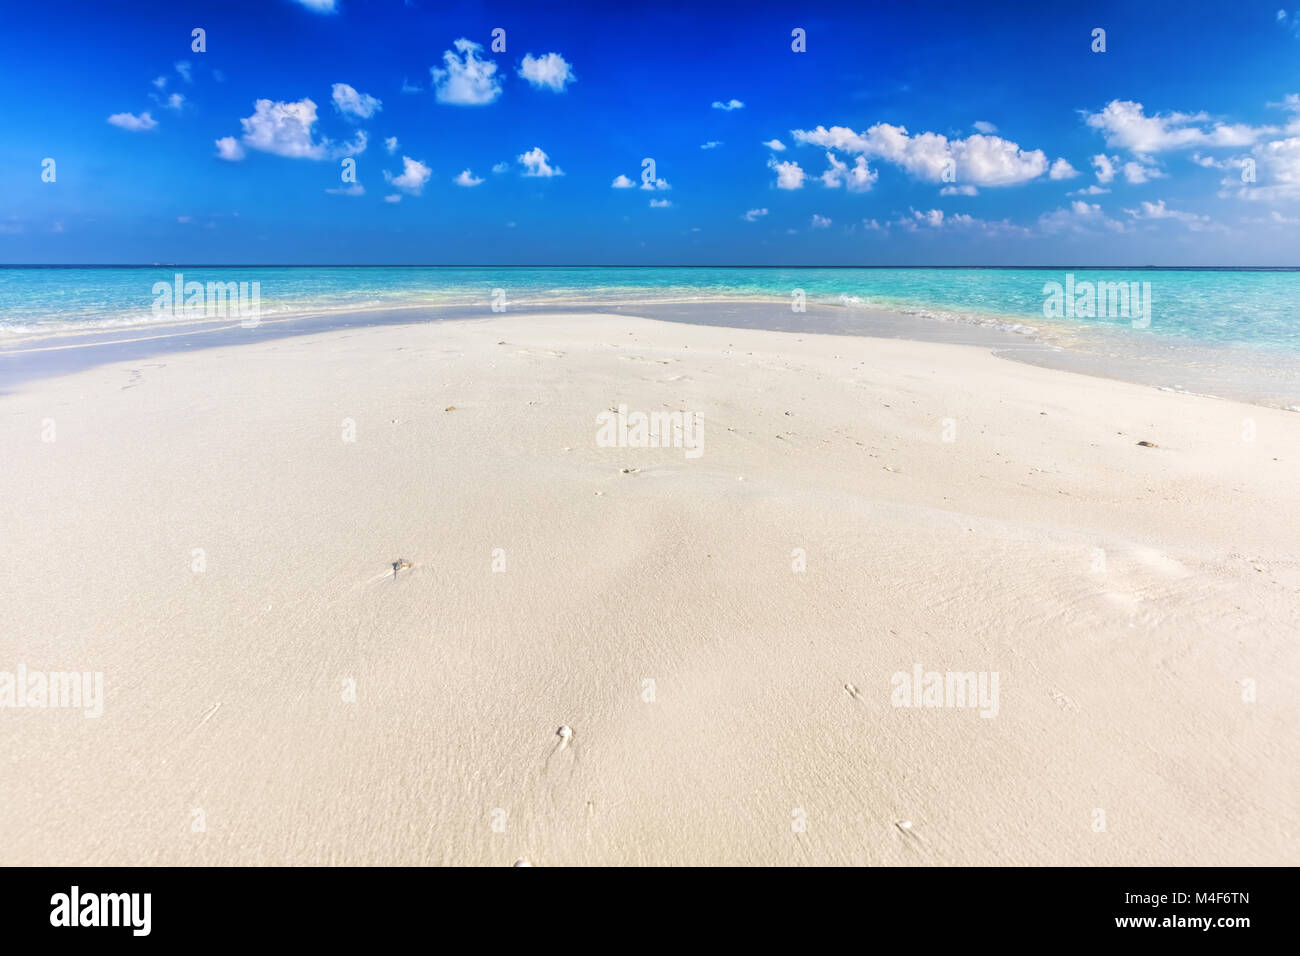 Tropical beach with white sand and clear turquoise ocean. Maldives Stock Photo